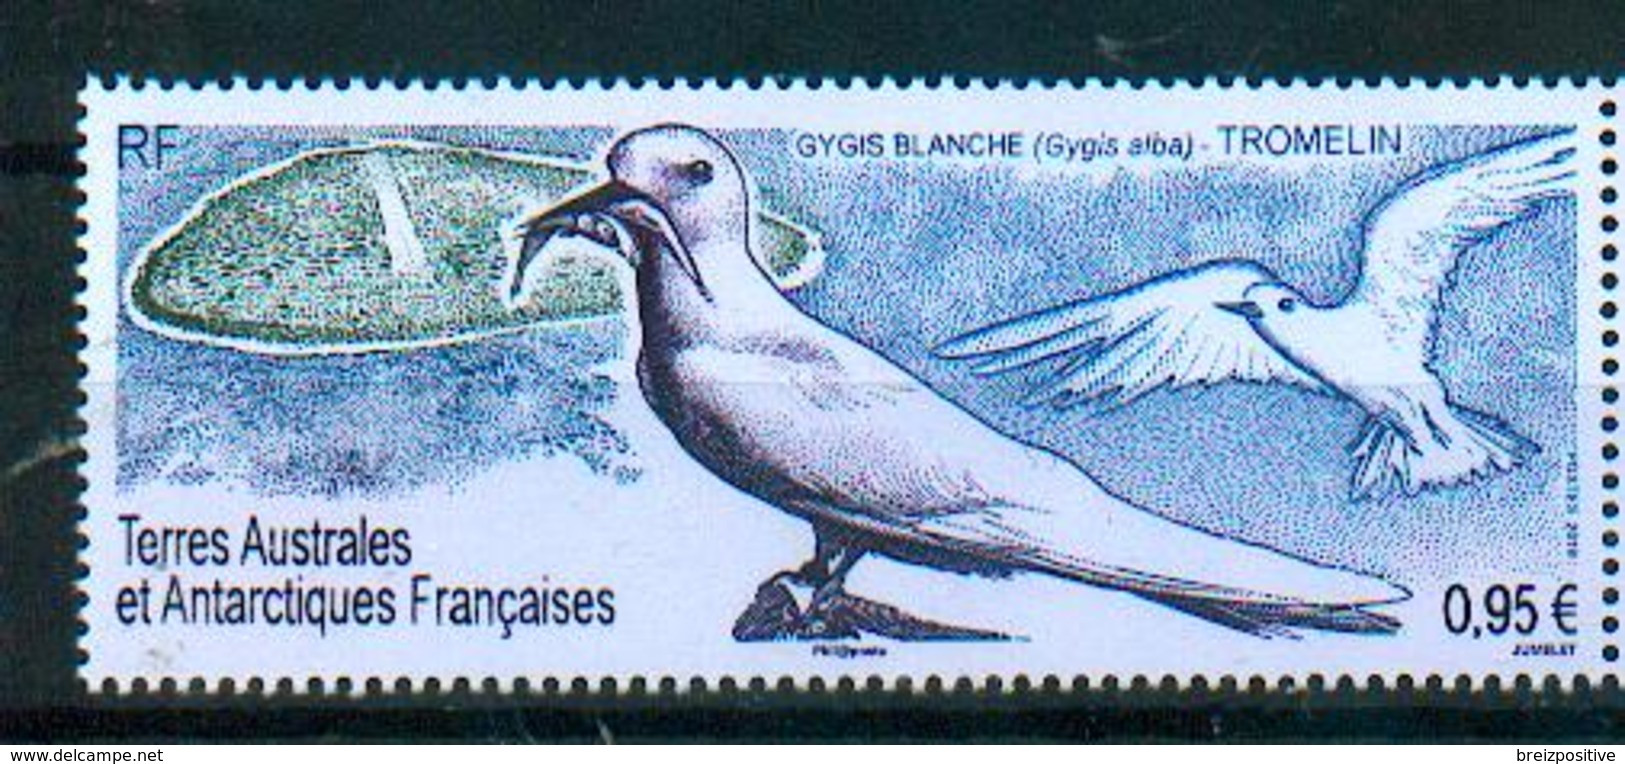 TAAF / French Southern Antarctic Territories 2019 - Gygis Blanche / White Tern / Gygis Alba - MNH - Mouettes